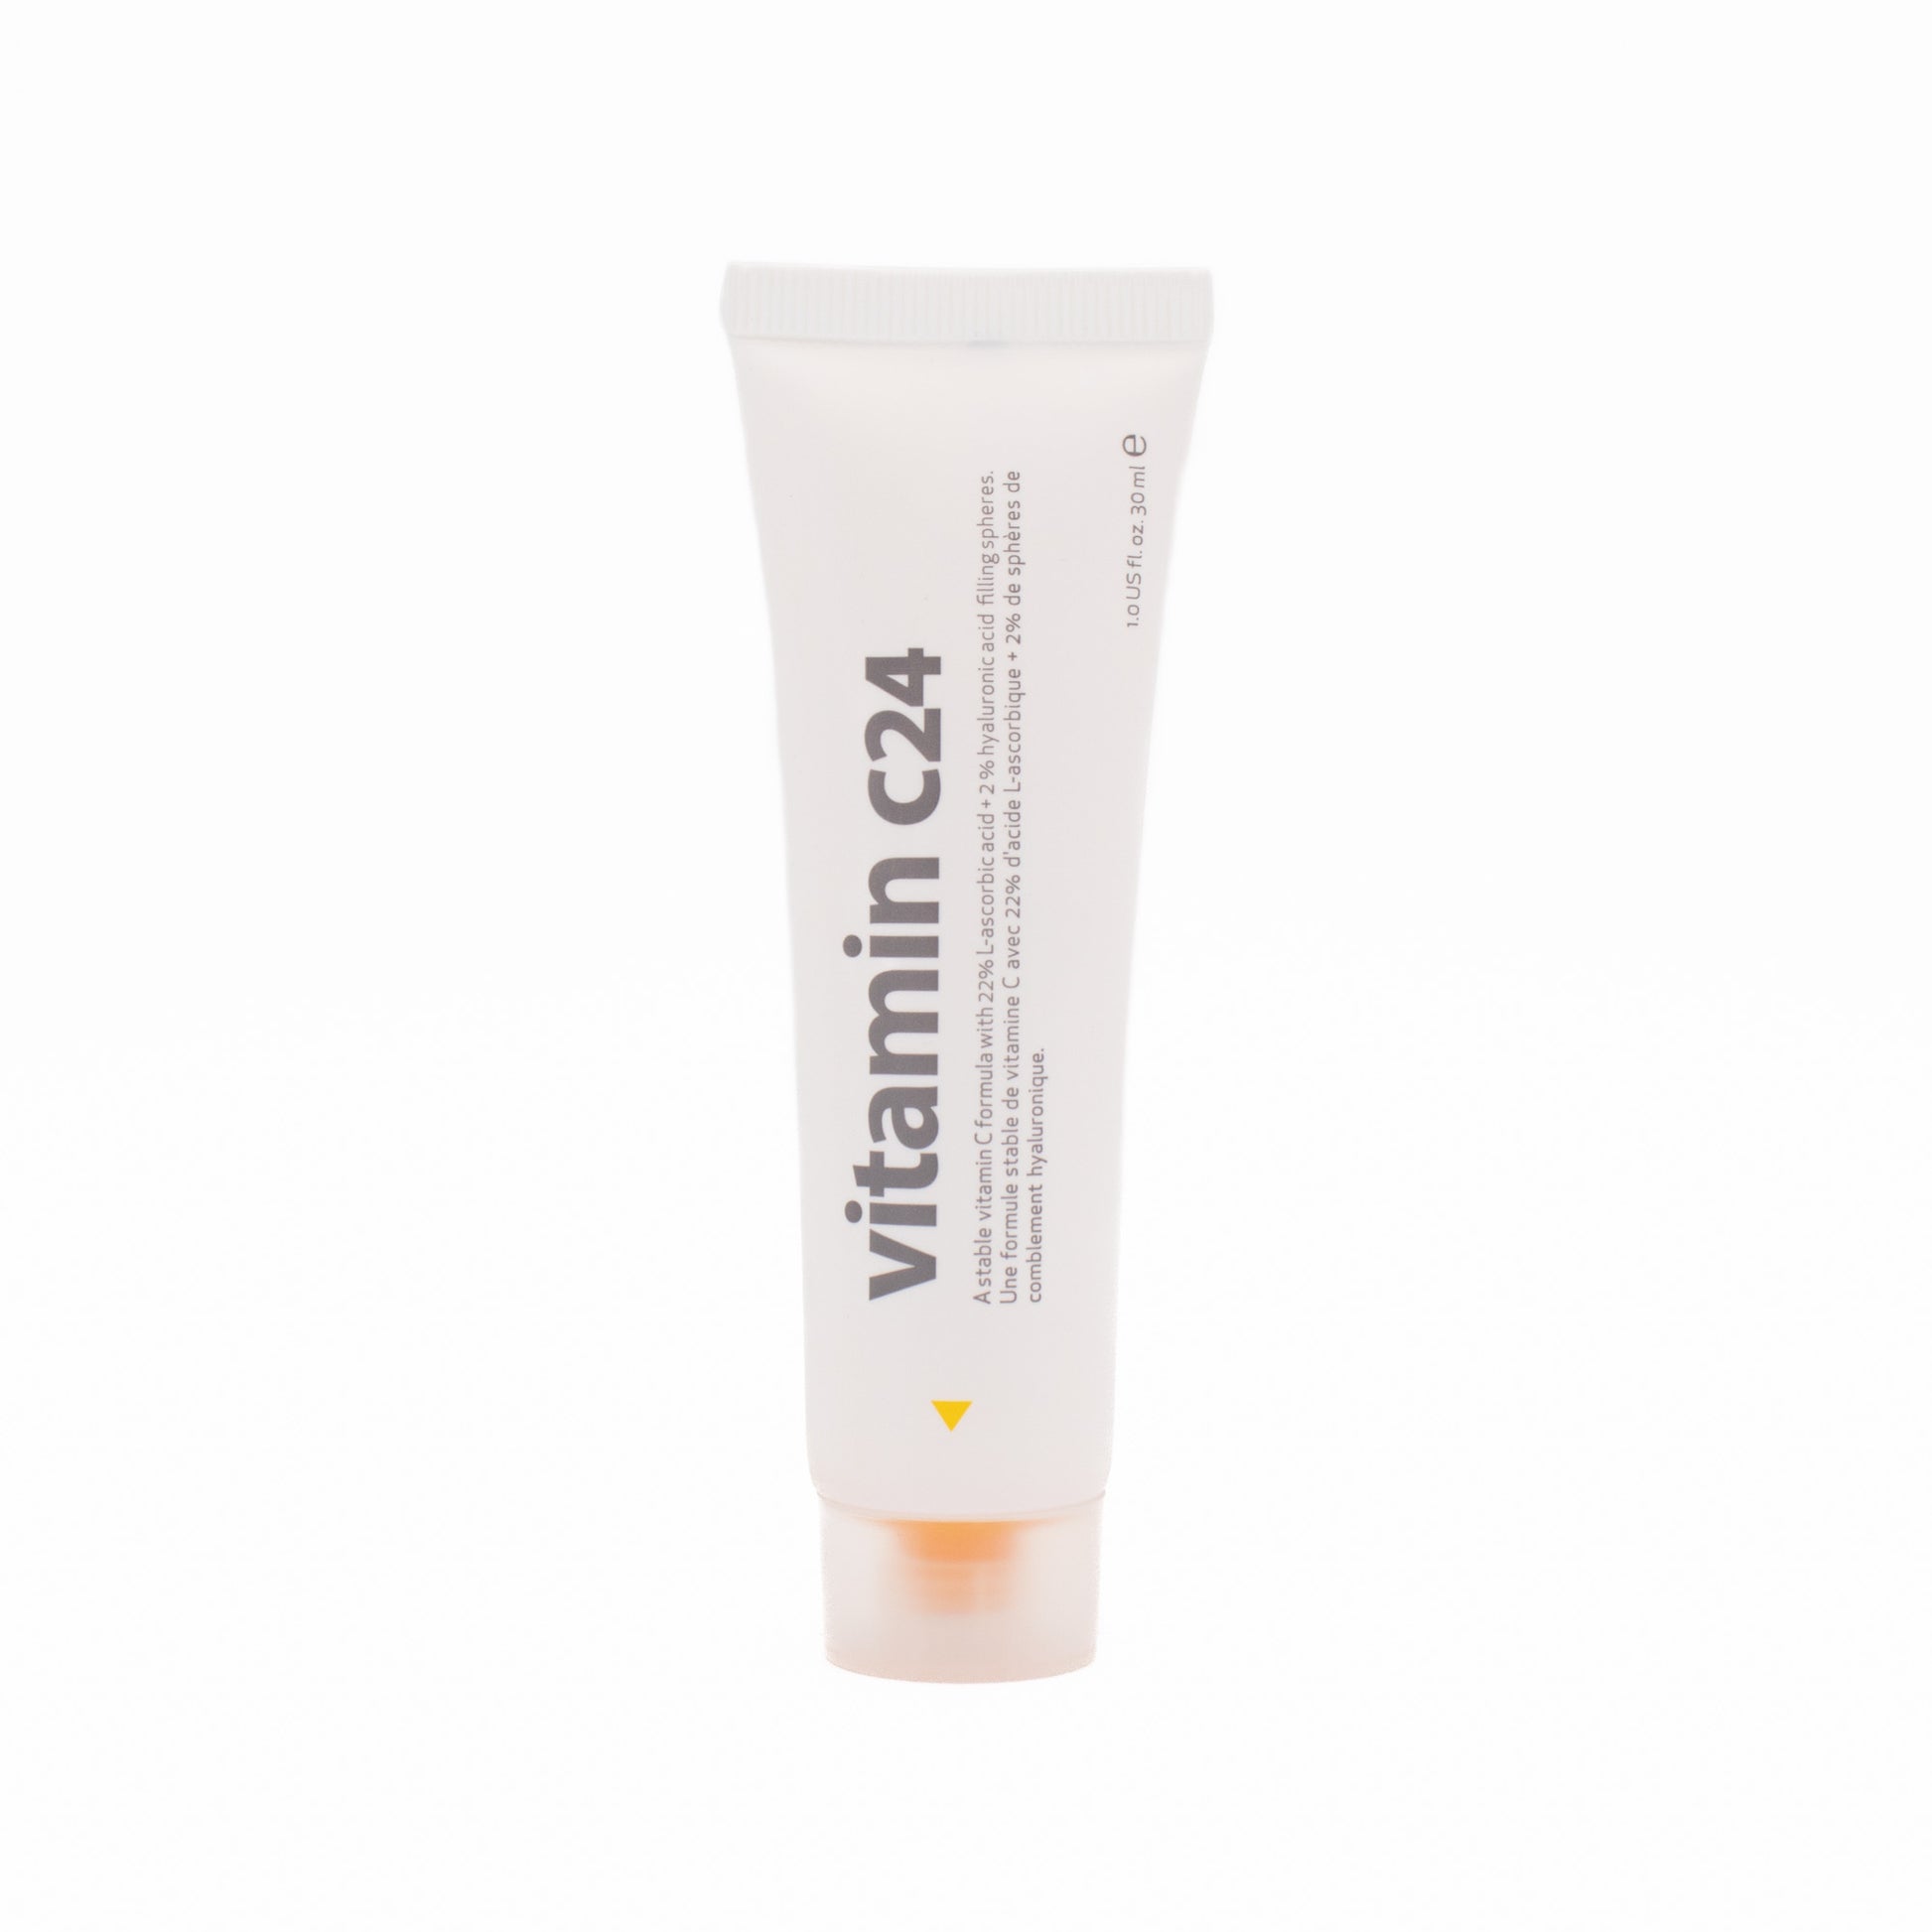 Indeed Laboratories Vitamin c24 30ml - Missing Box - This is Beauty UK